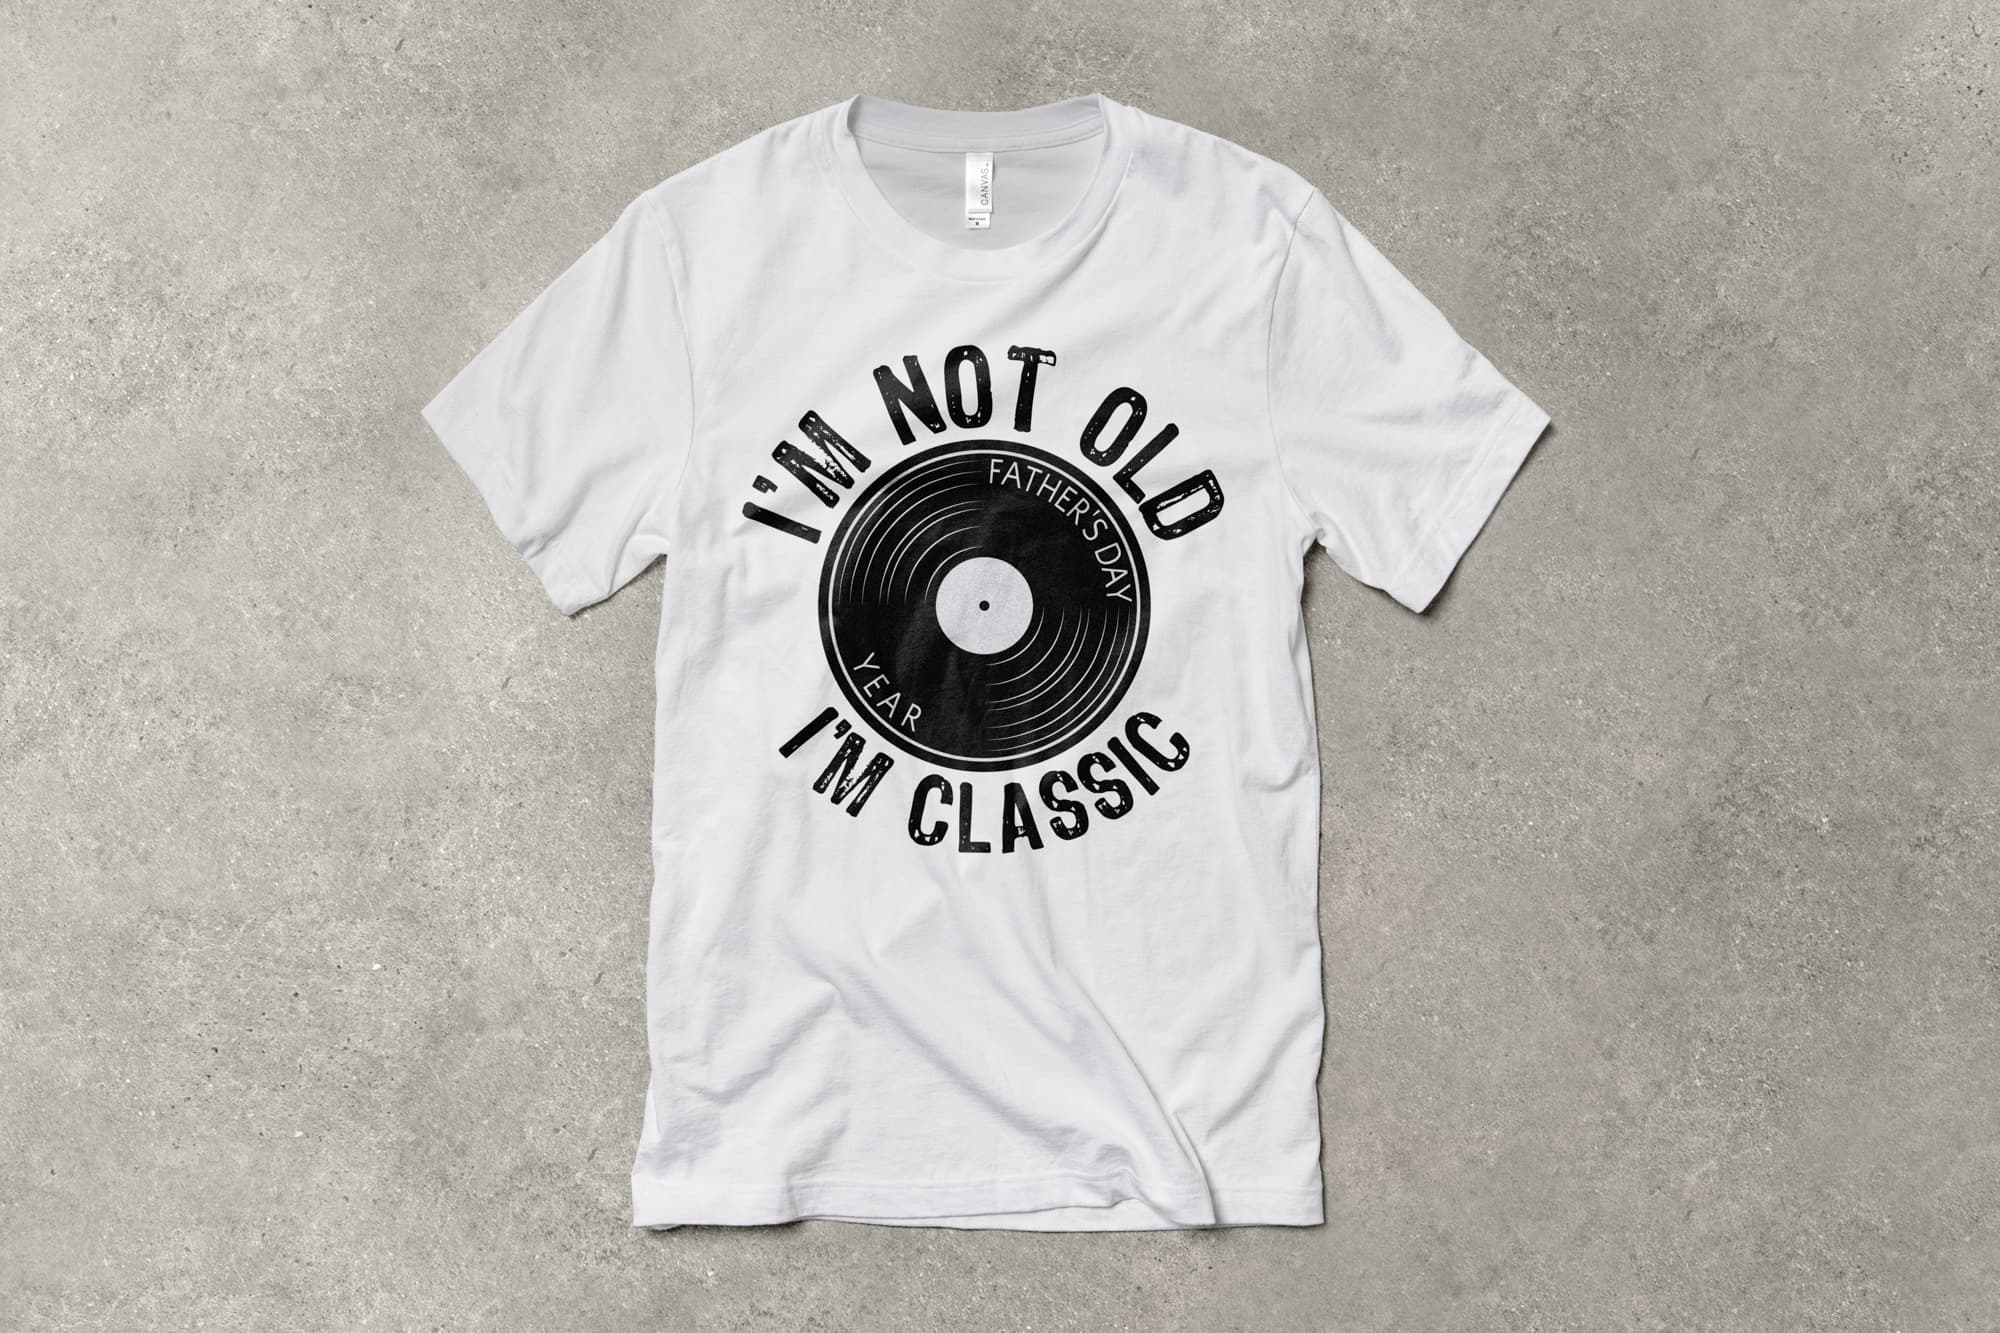 A flat t-shirt that has a customizable design that says "I'm not old, I'm classic" and features a vinyl record.